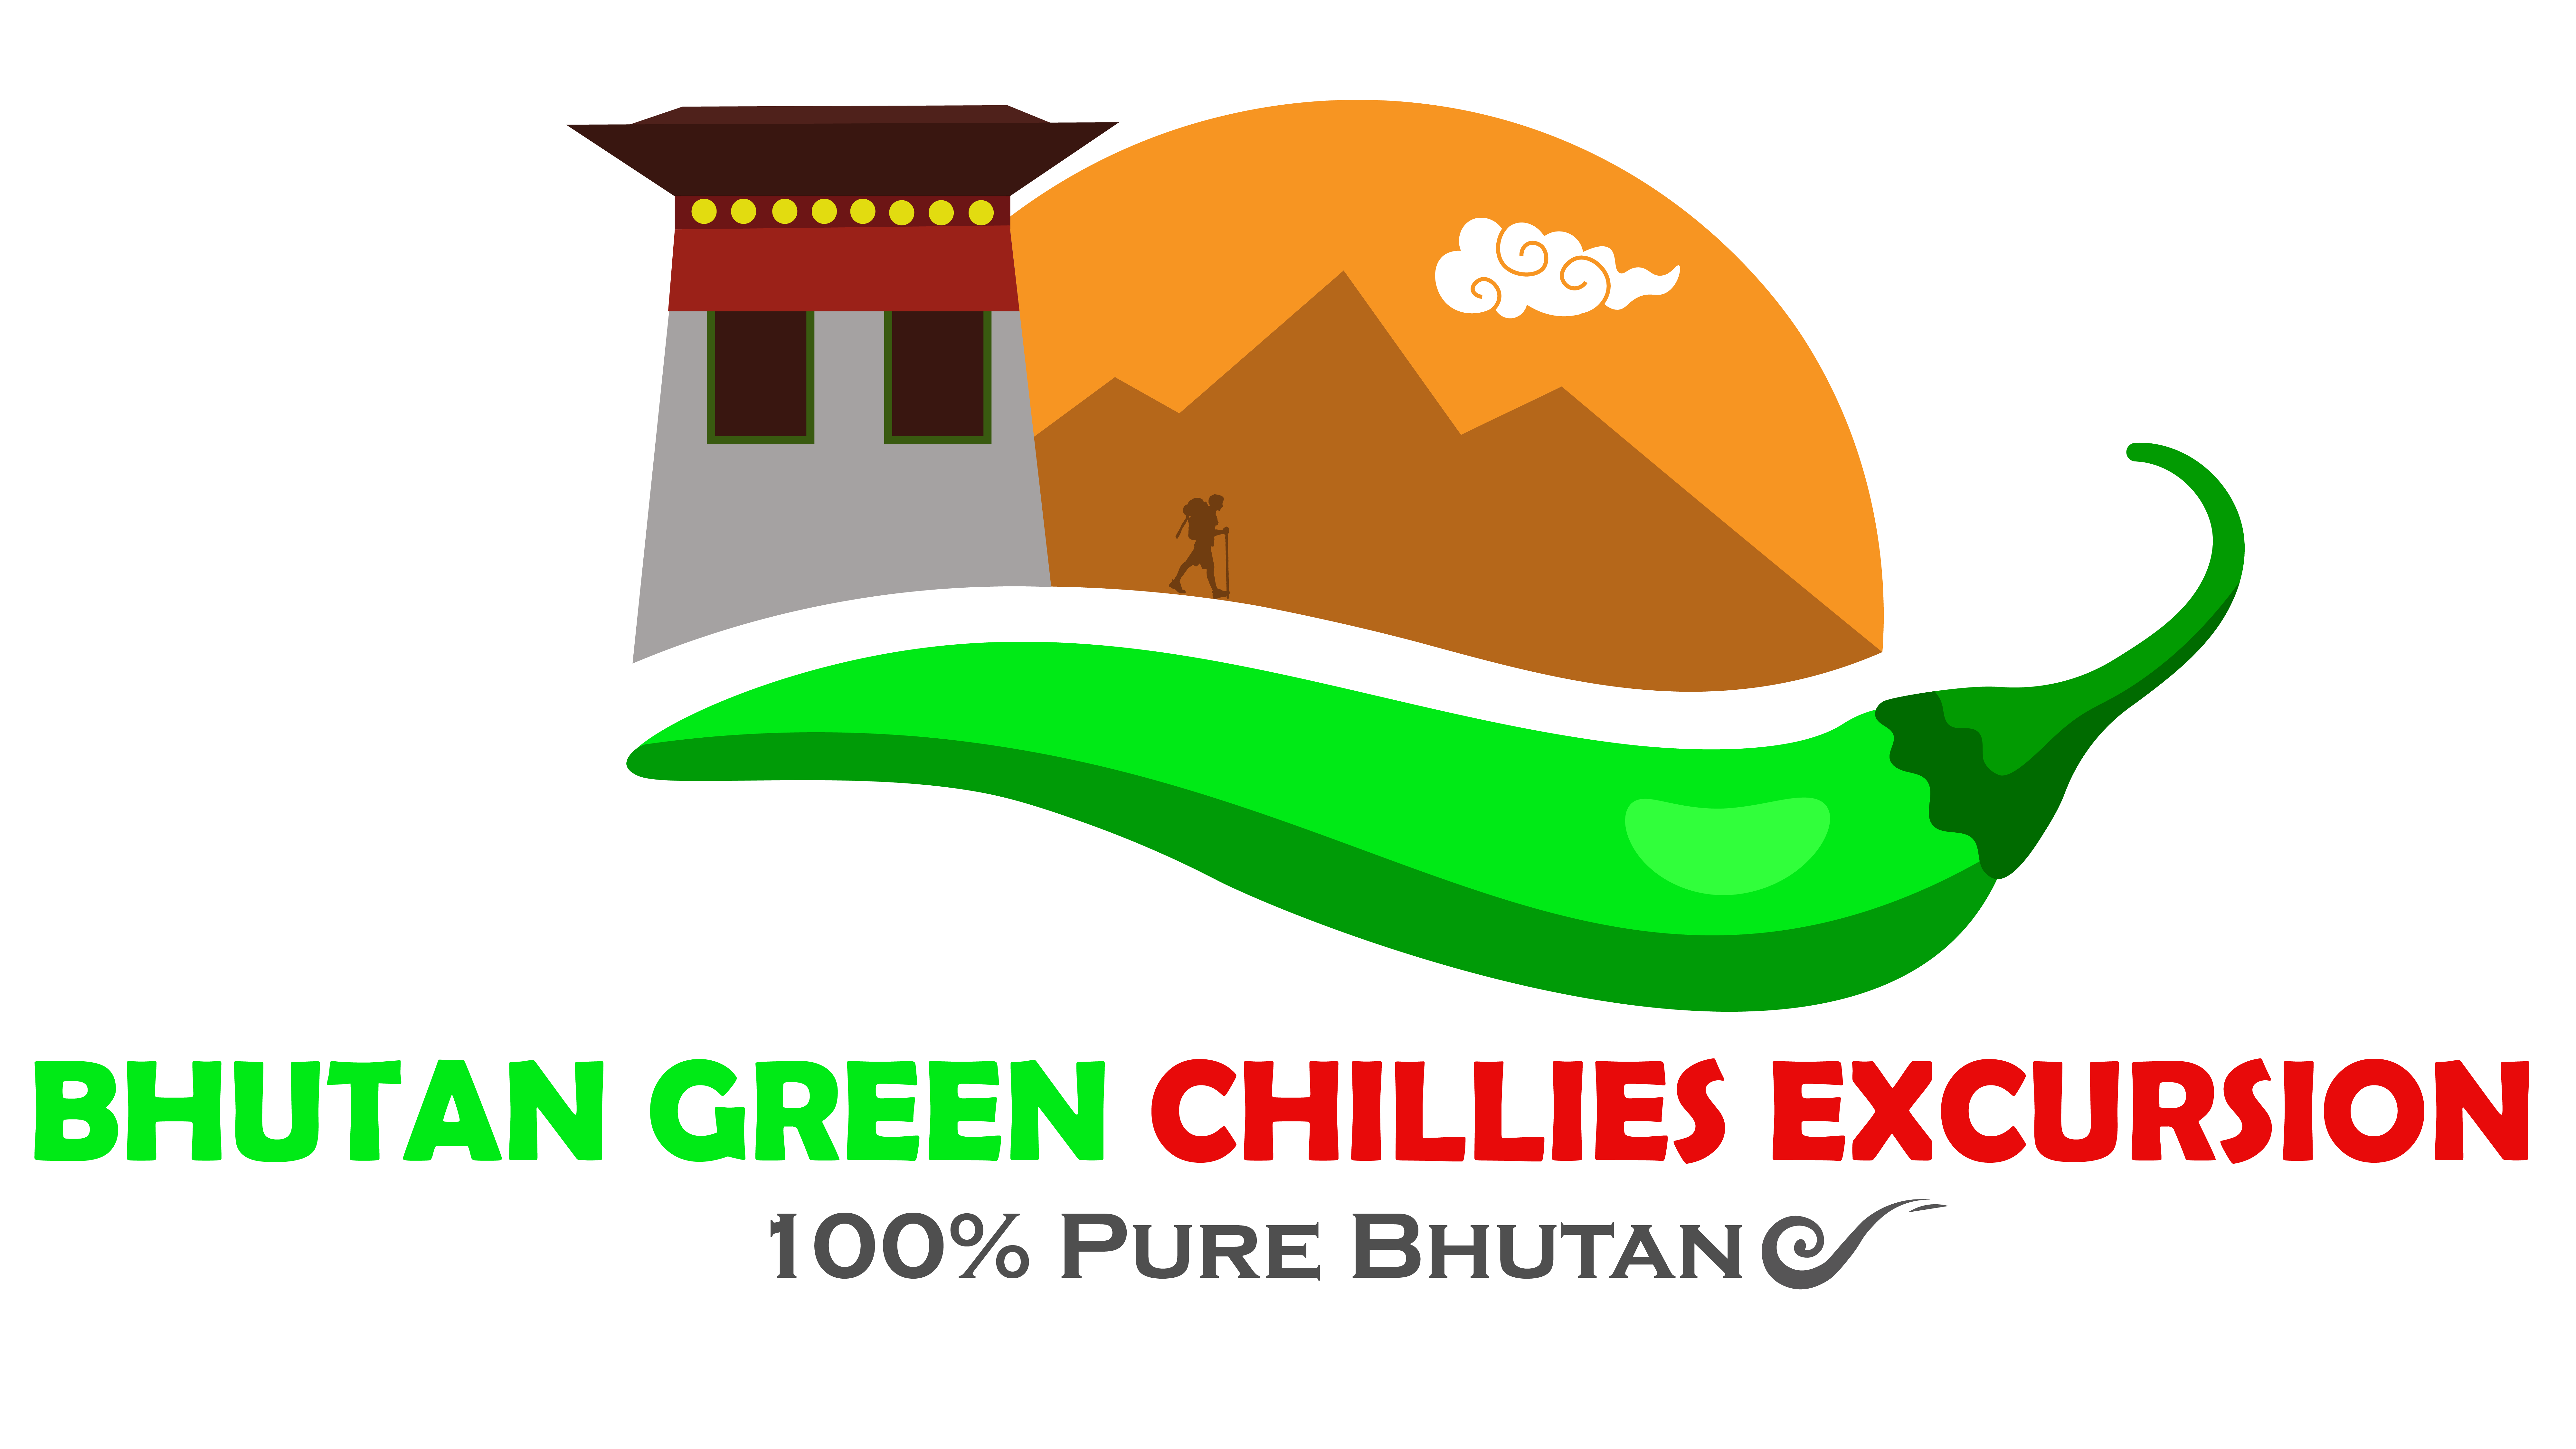 Green Chillies Excursion